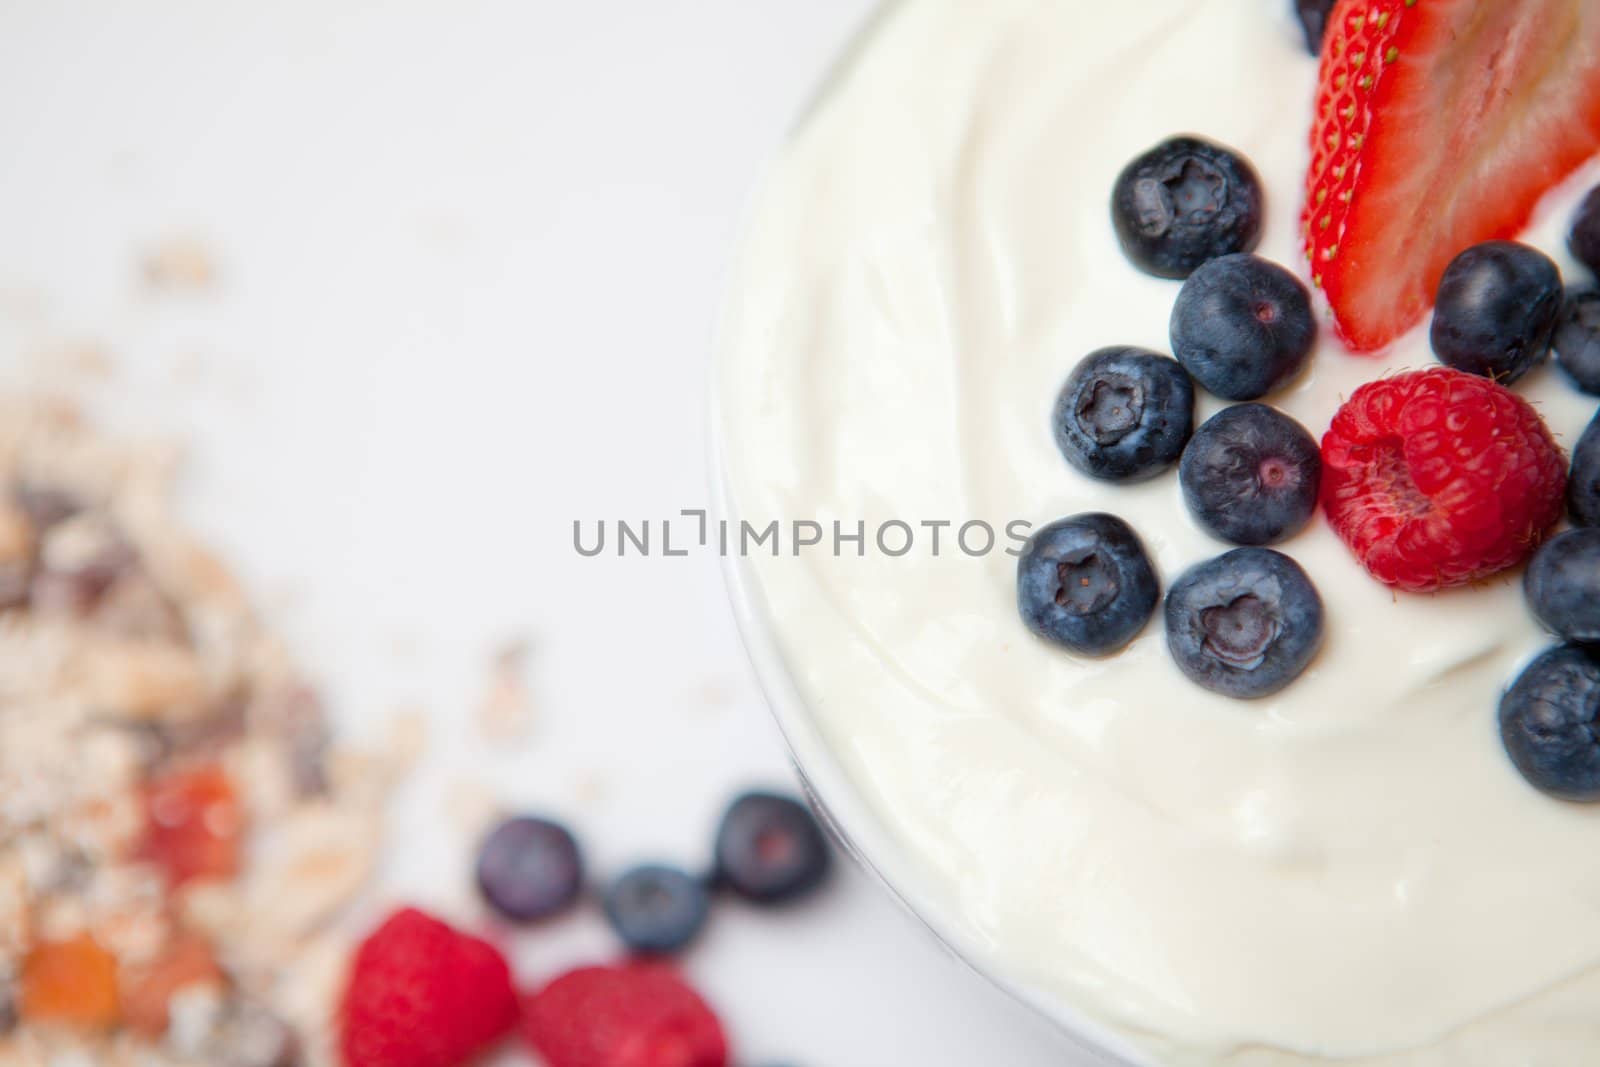 Cereals and berries cream against a white background